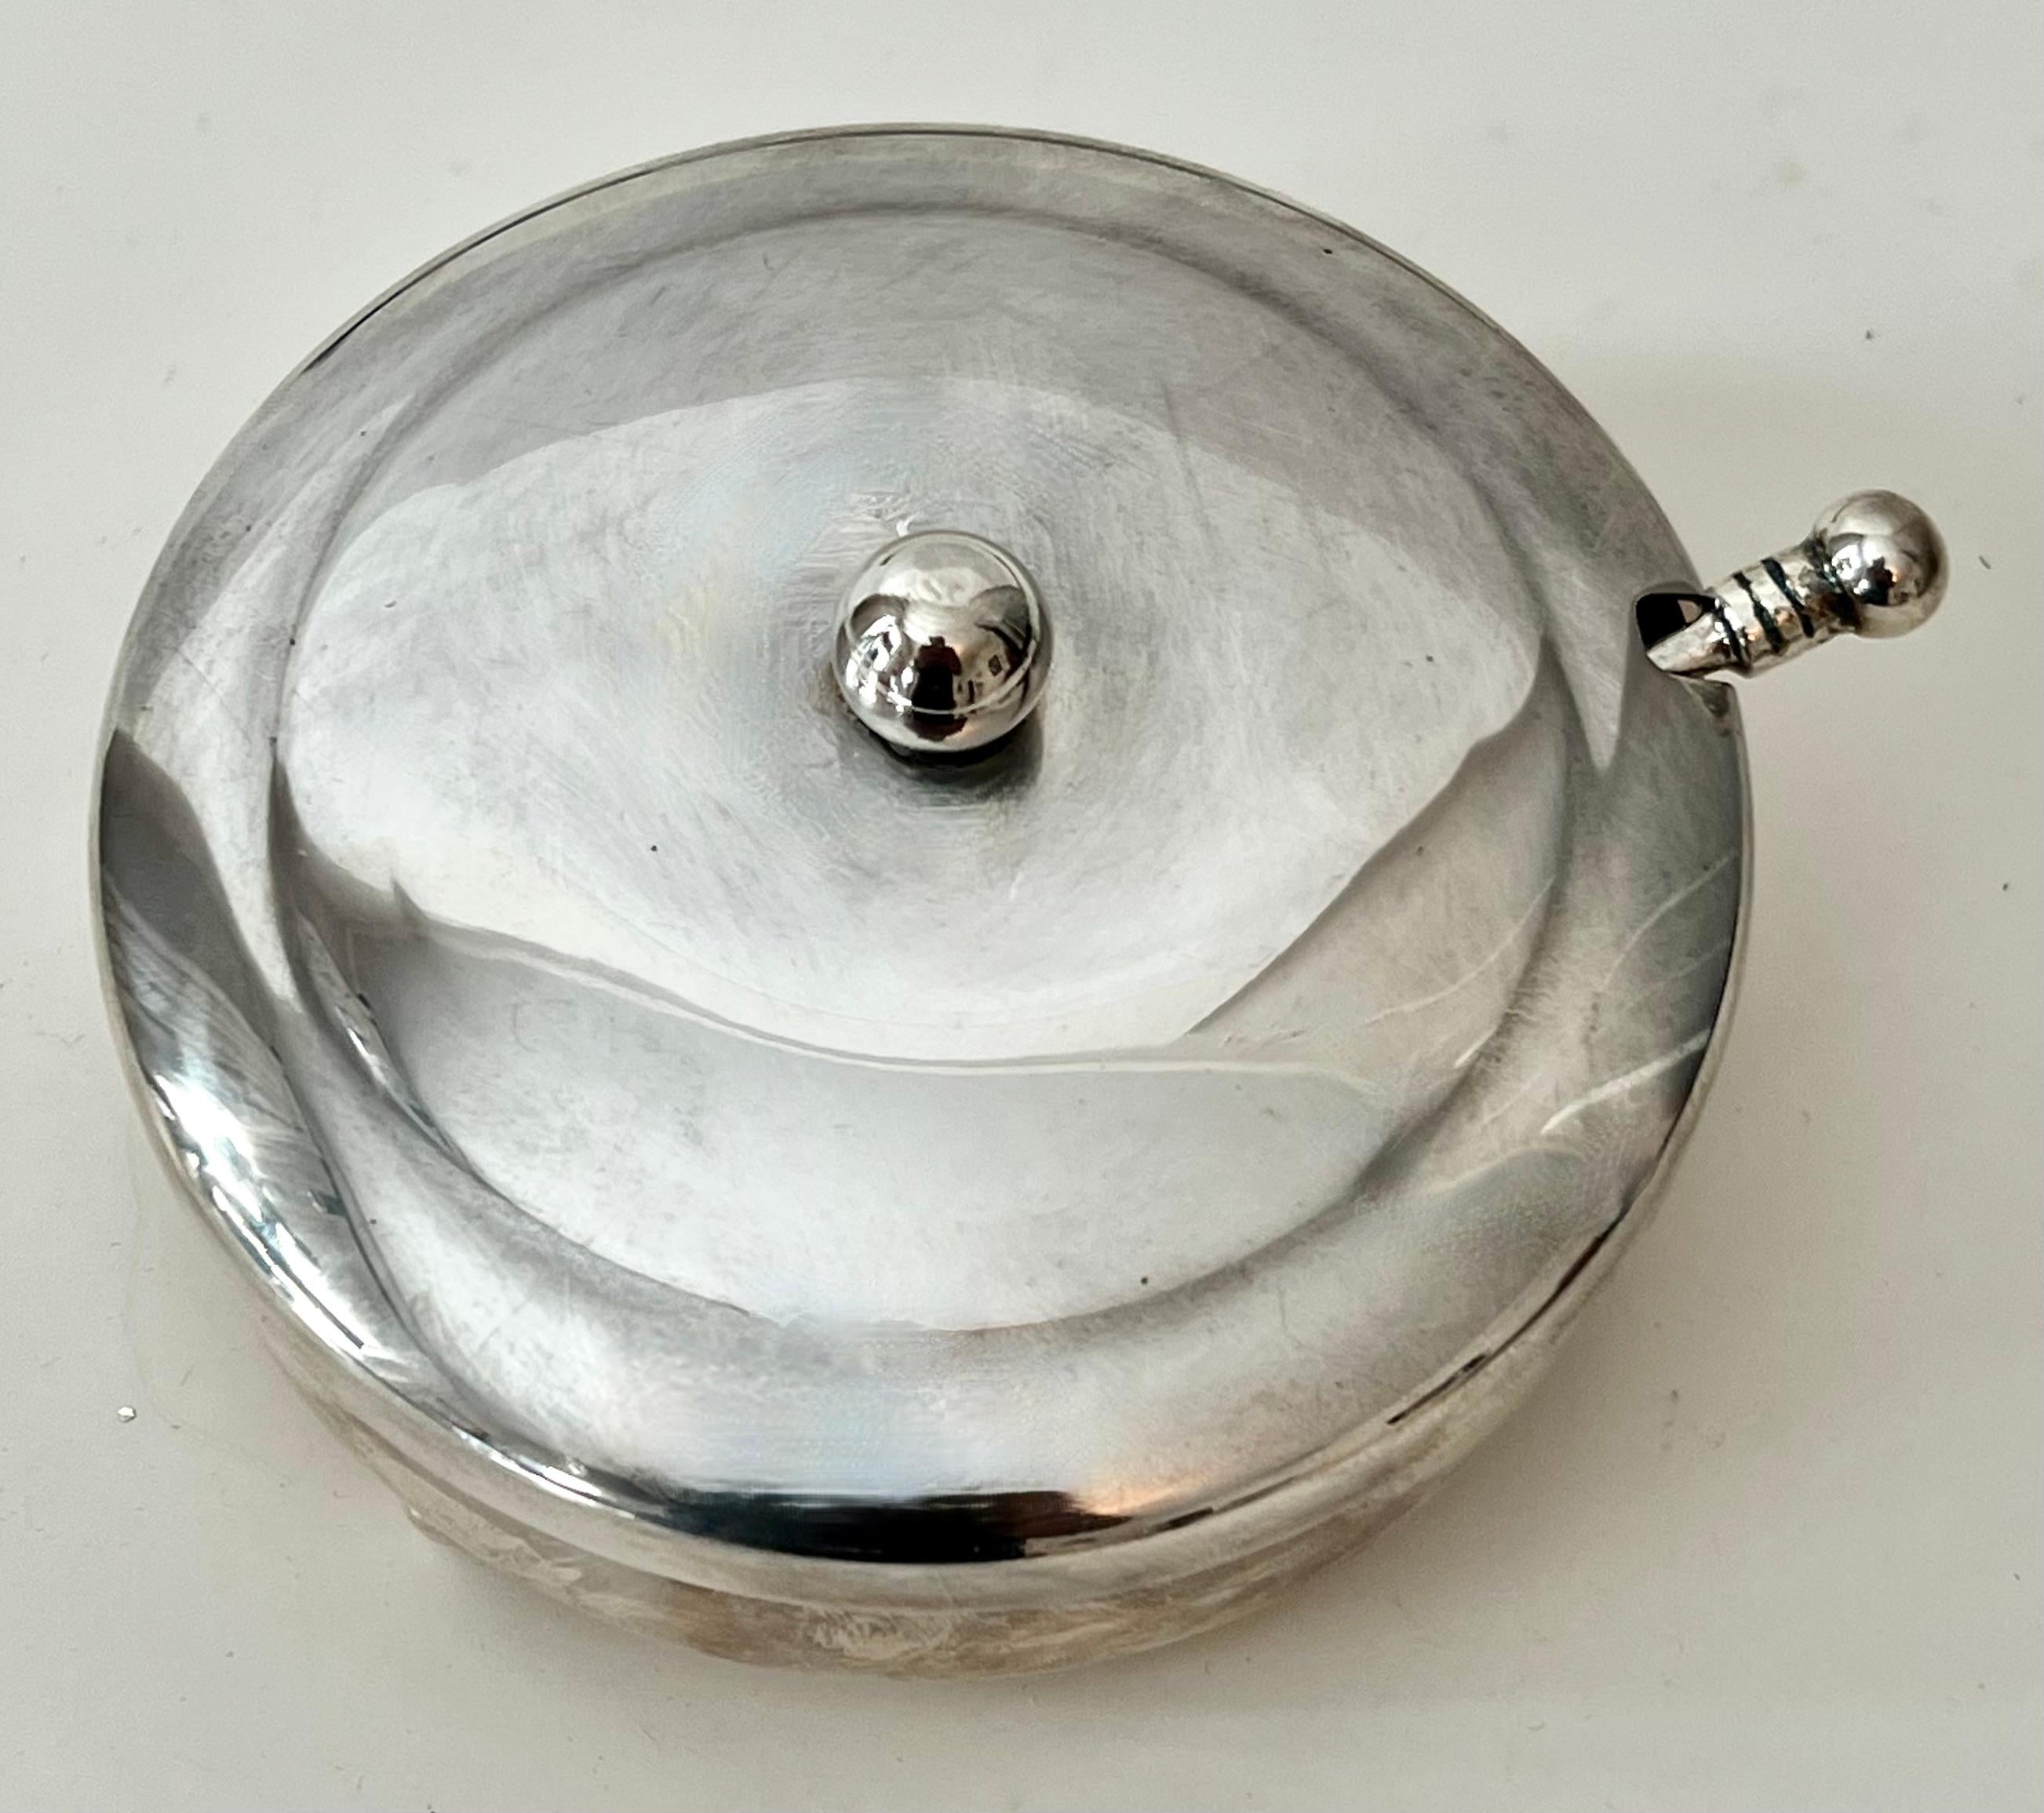 English Silverplate Sugar or Condiment Bowl with Spoon For Sale